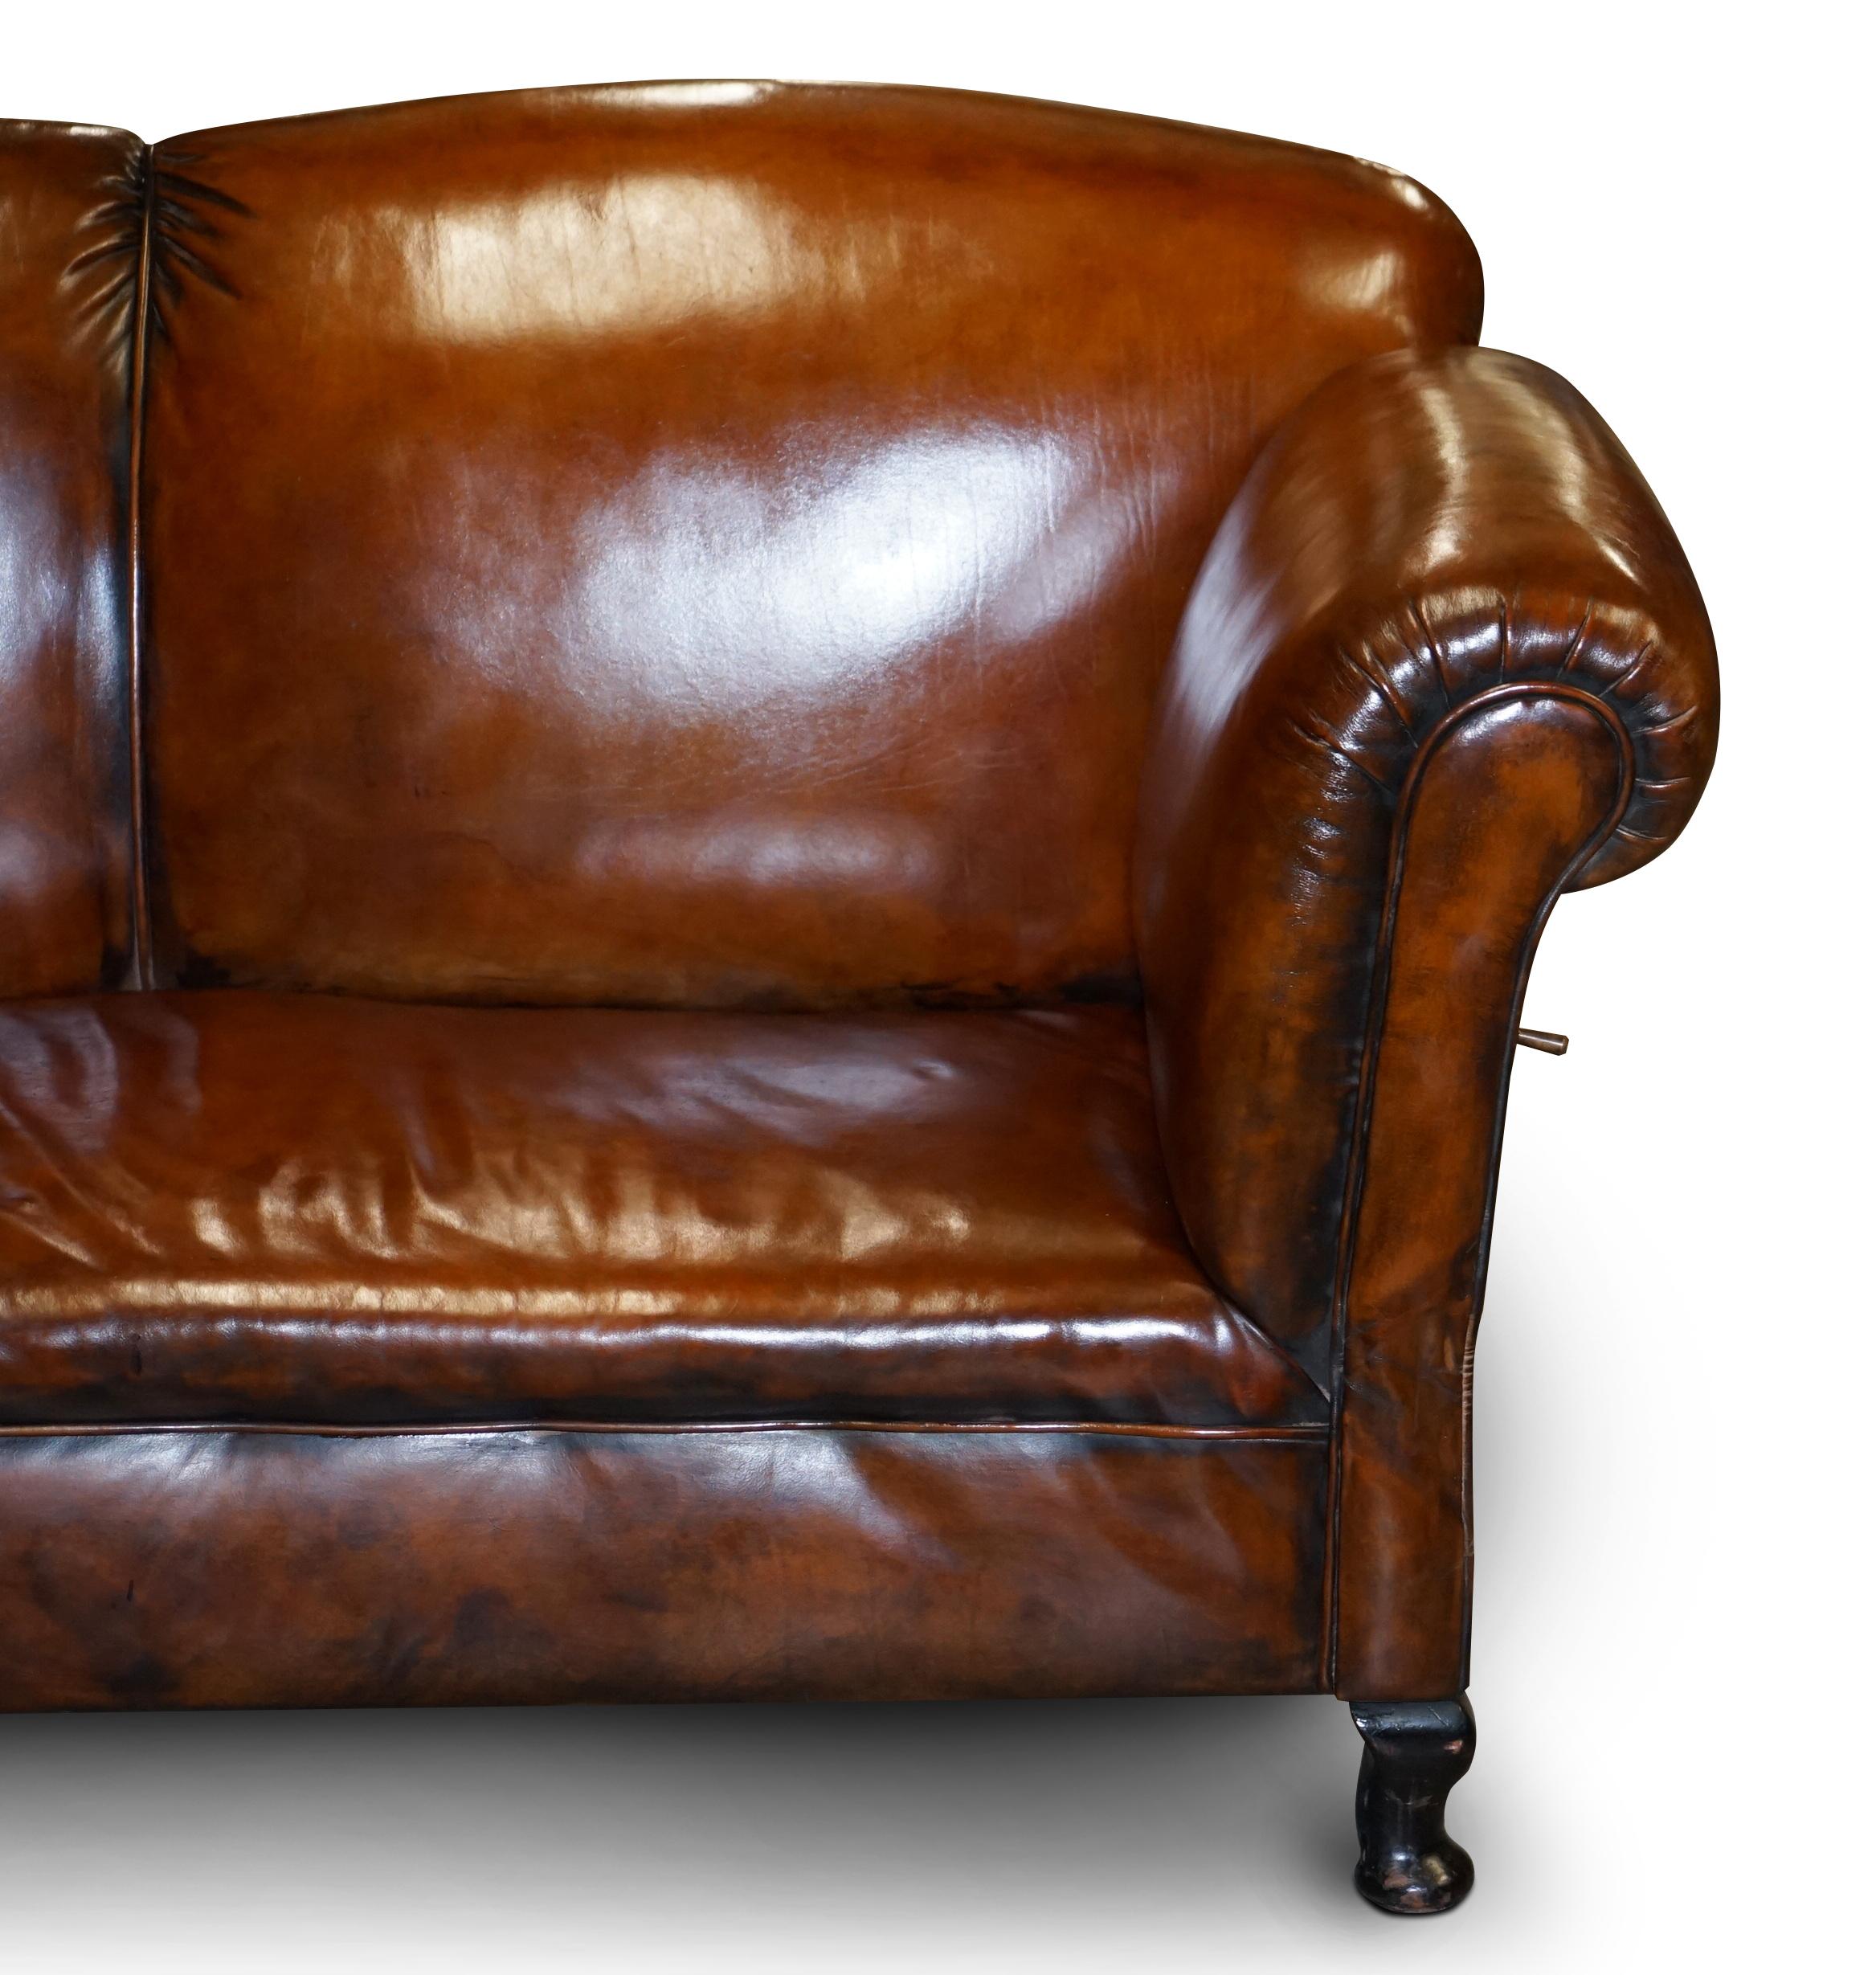 Fully Restored Whisky Brown Leather Drop Arm Chaise Lounge Sofa Horse Hair Fill For Sale 11